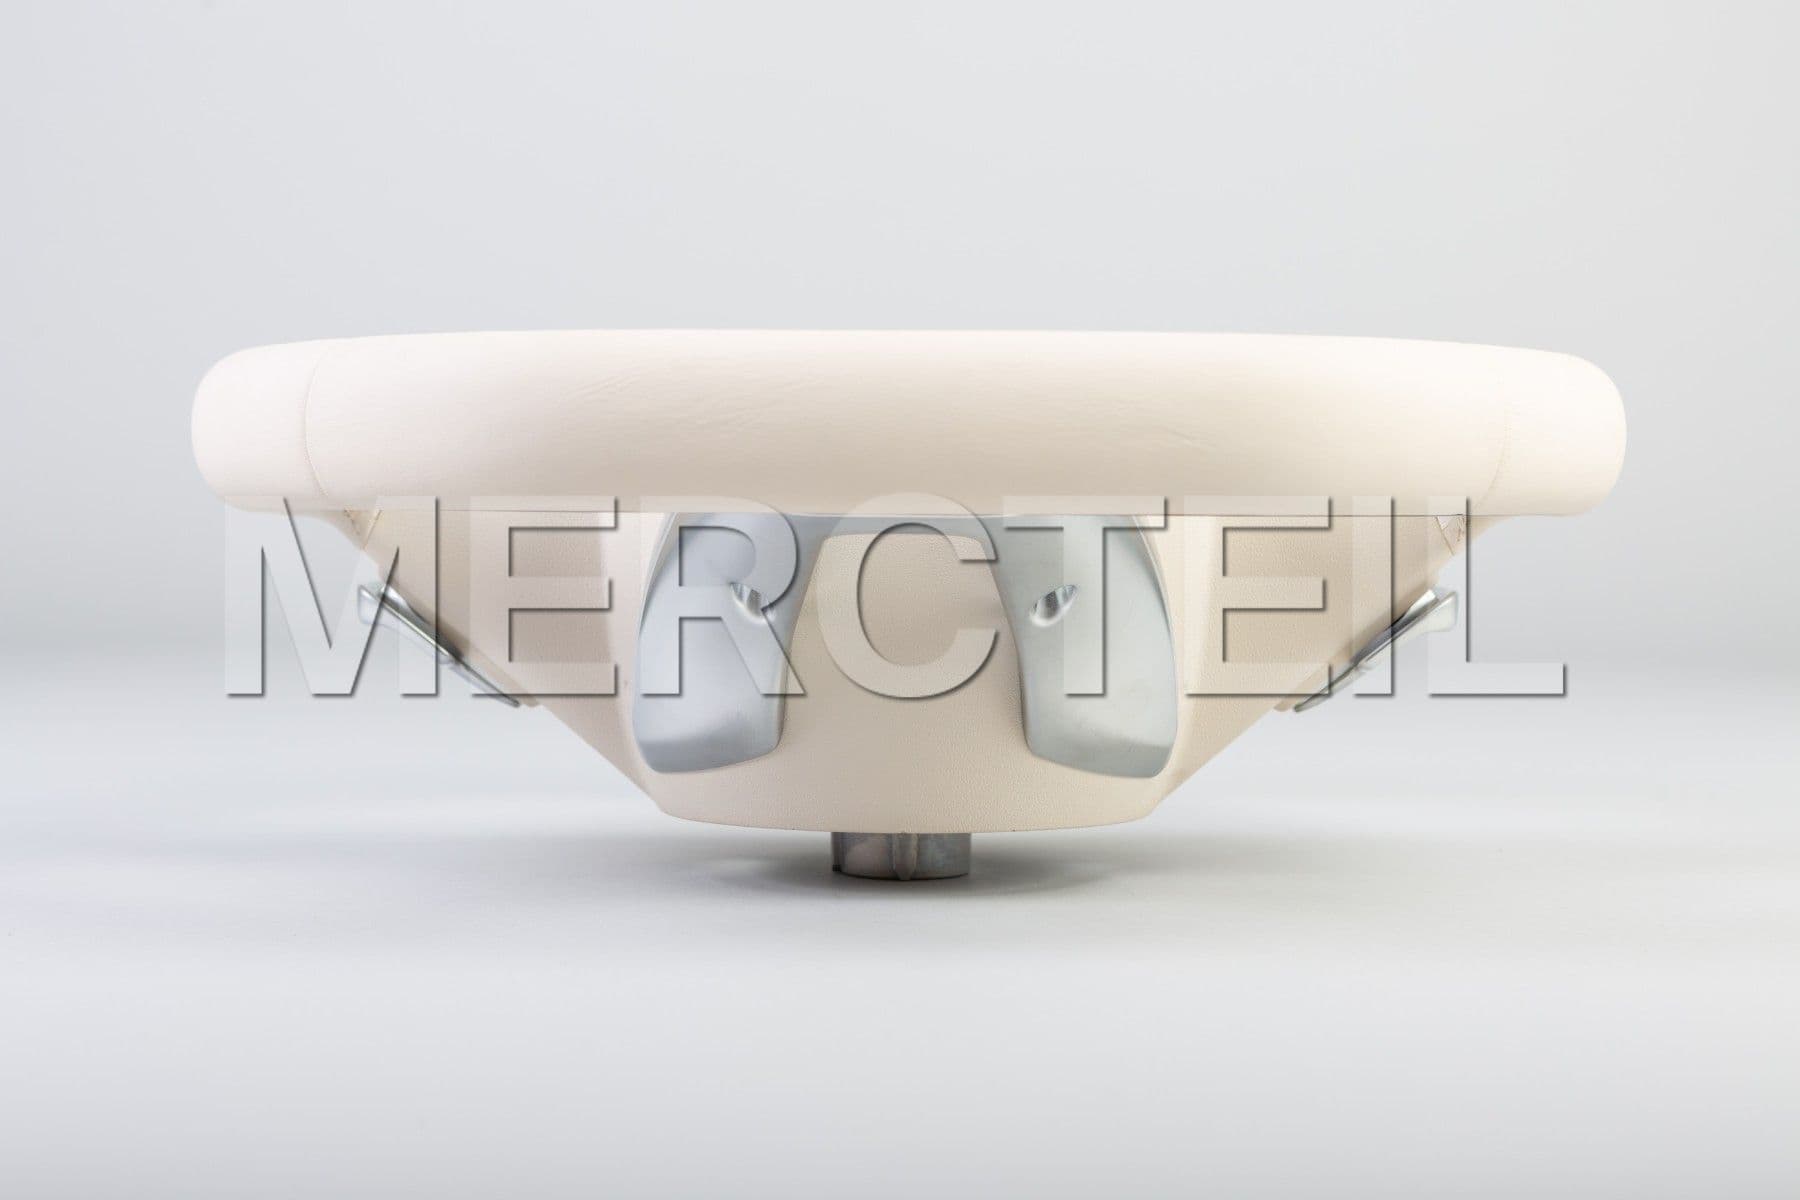 Mercedes Leather Steering Wheel With Walnut Veneer for S-Class (part number: A00146024038R85)